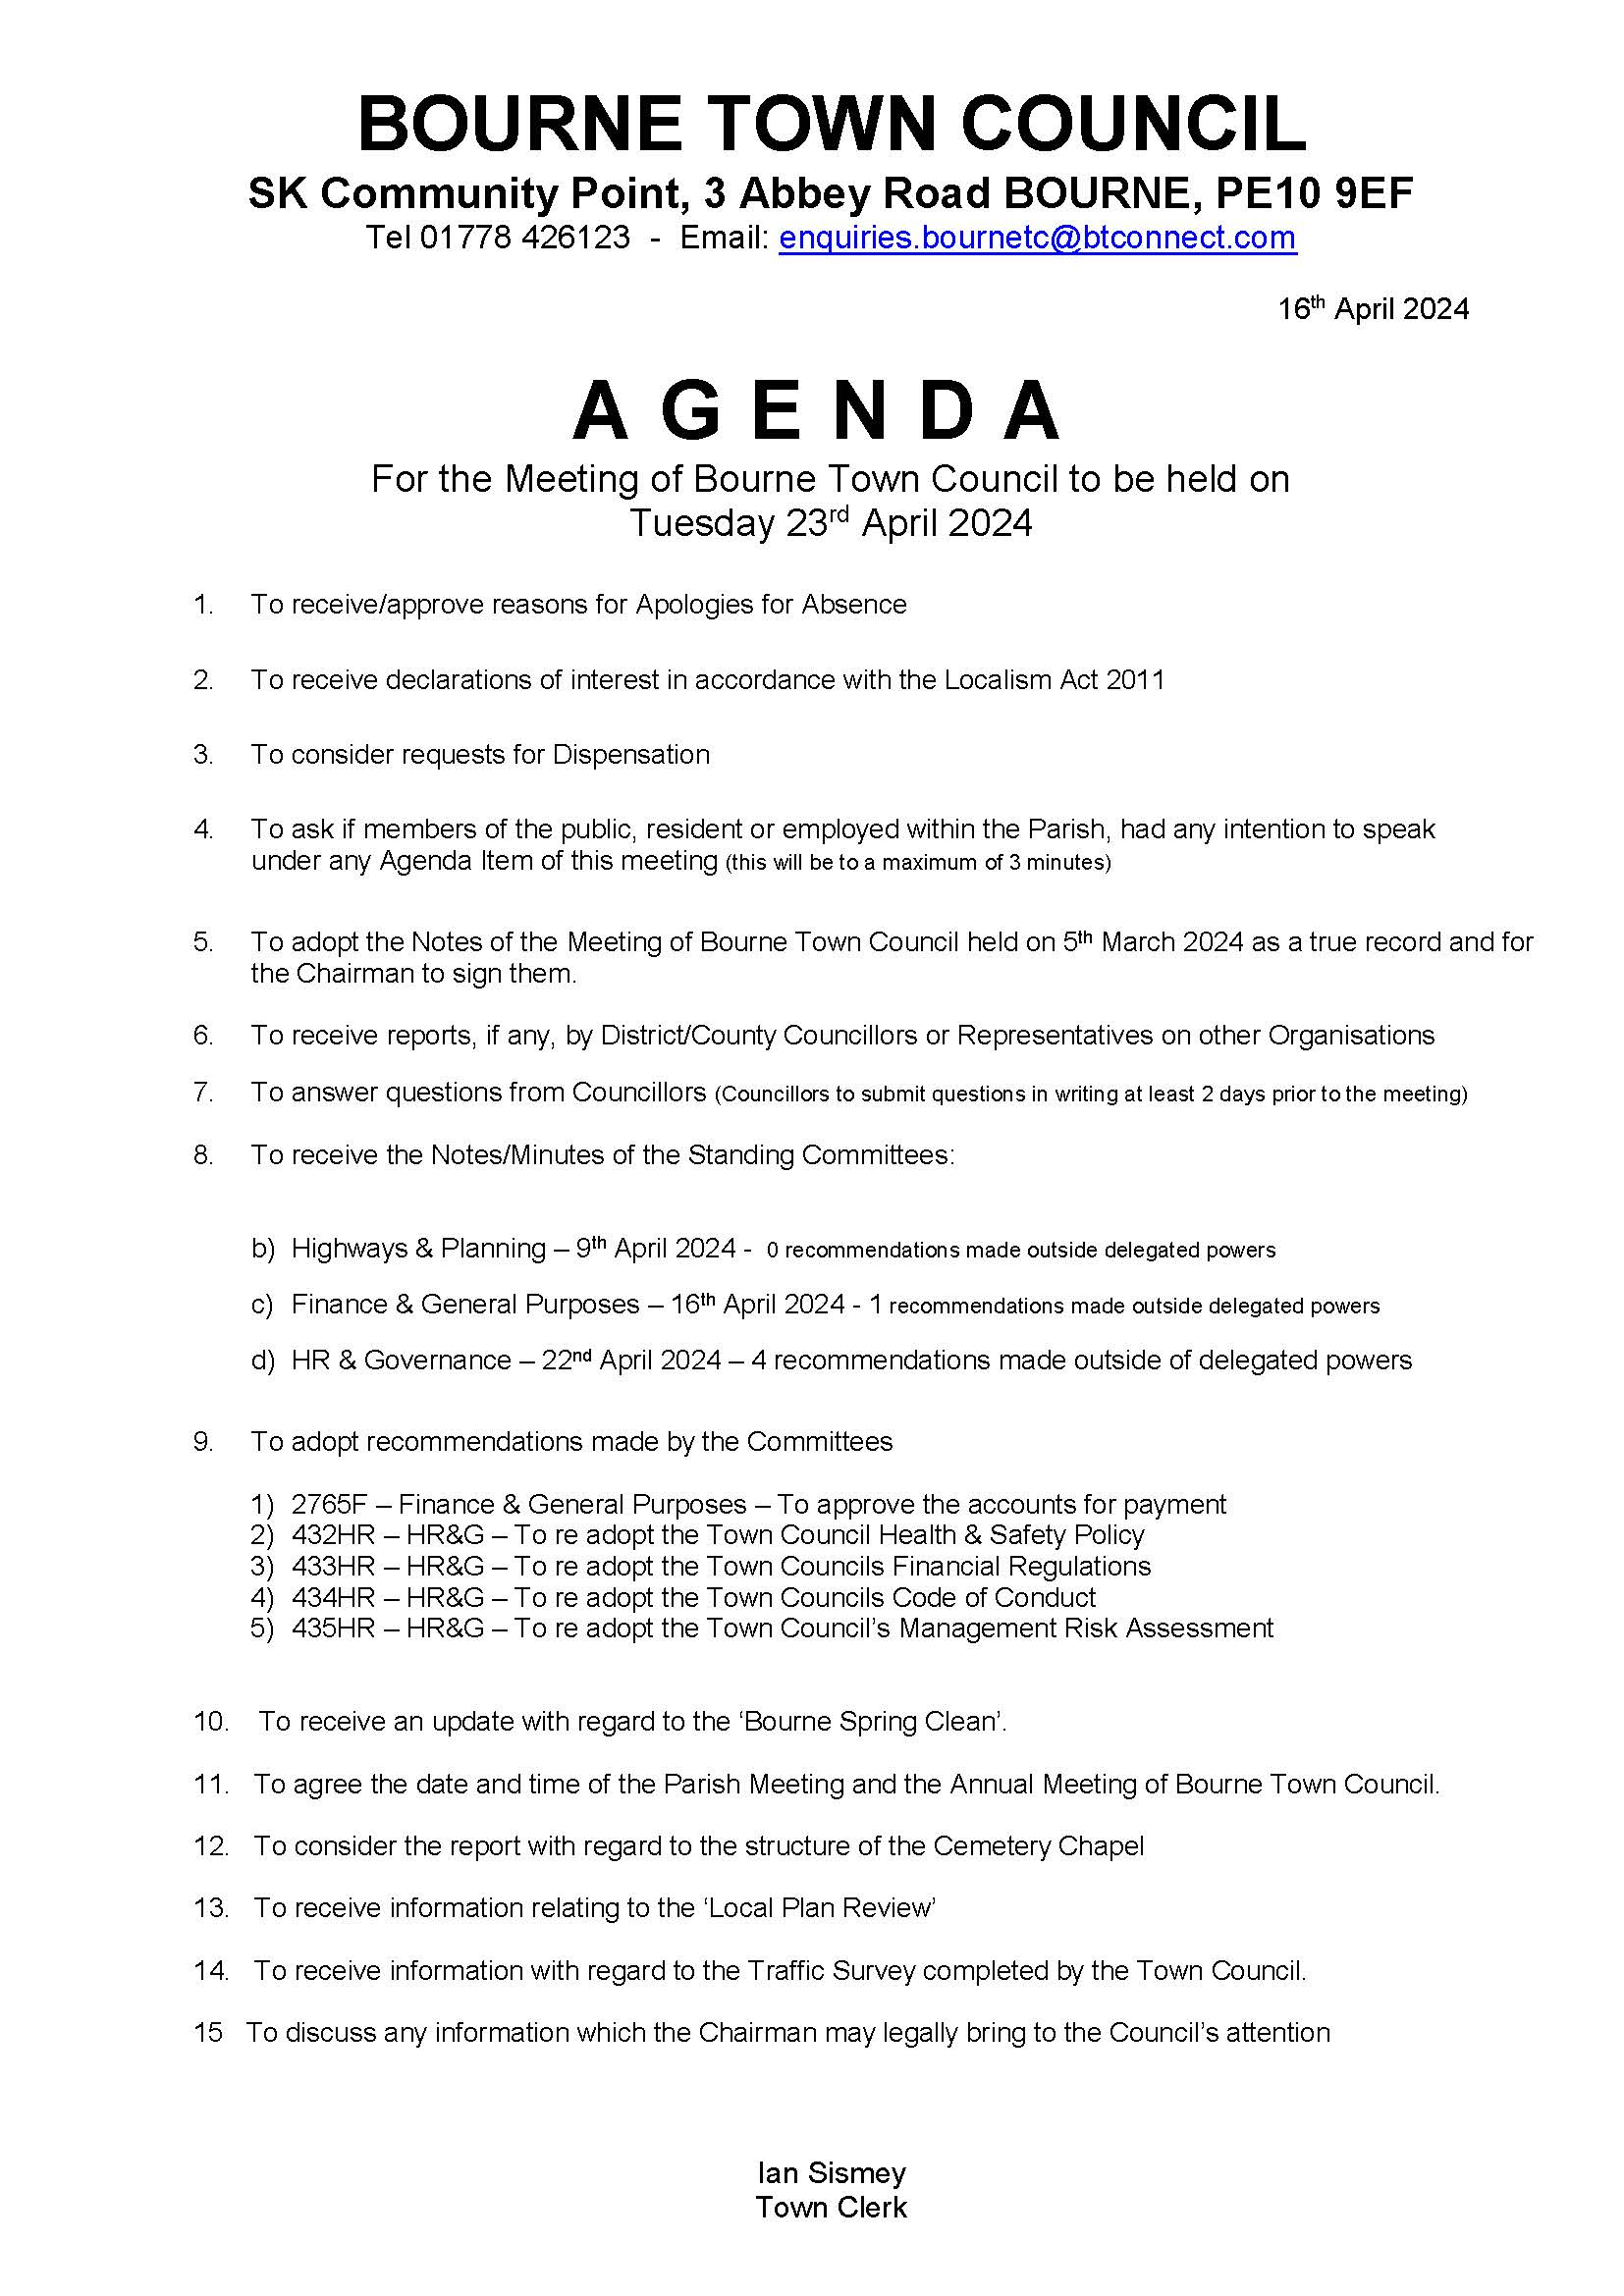 Agenda and notice page 2